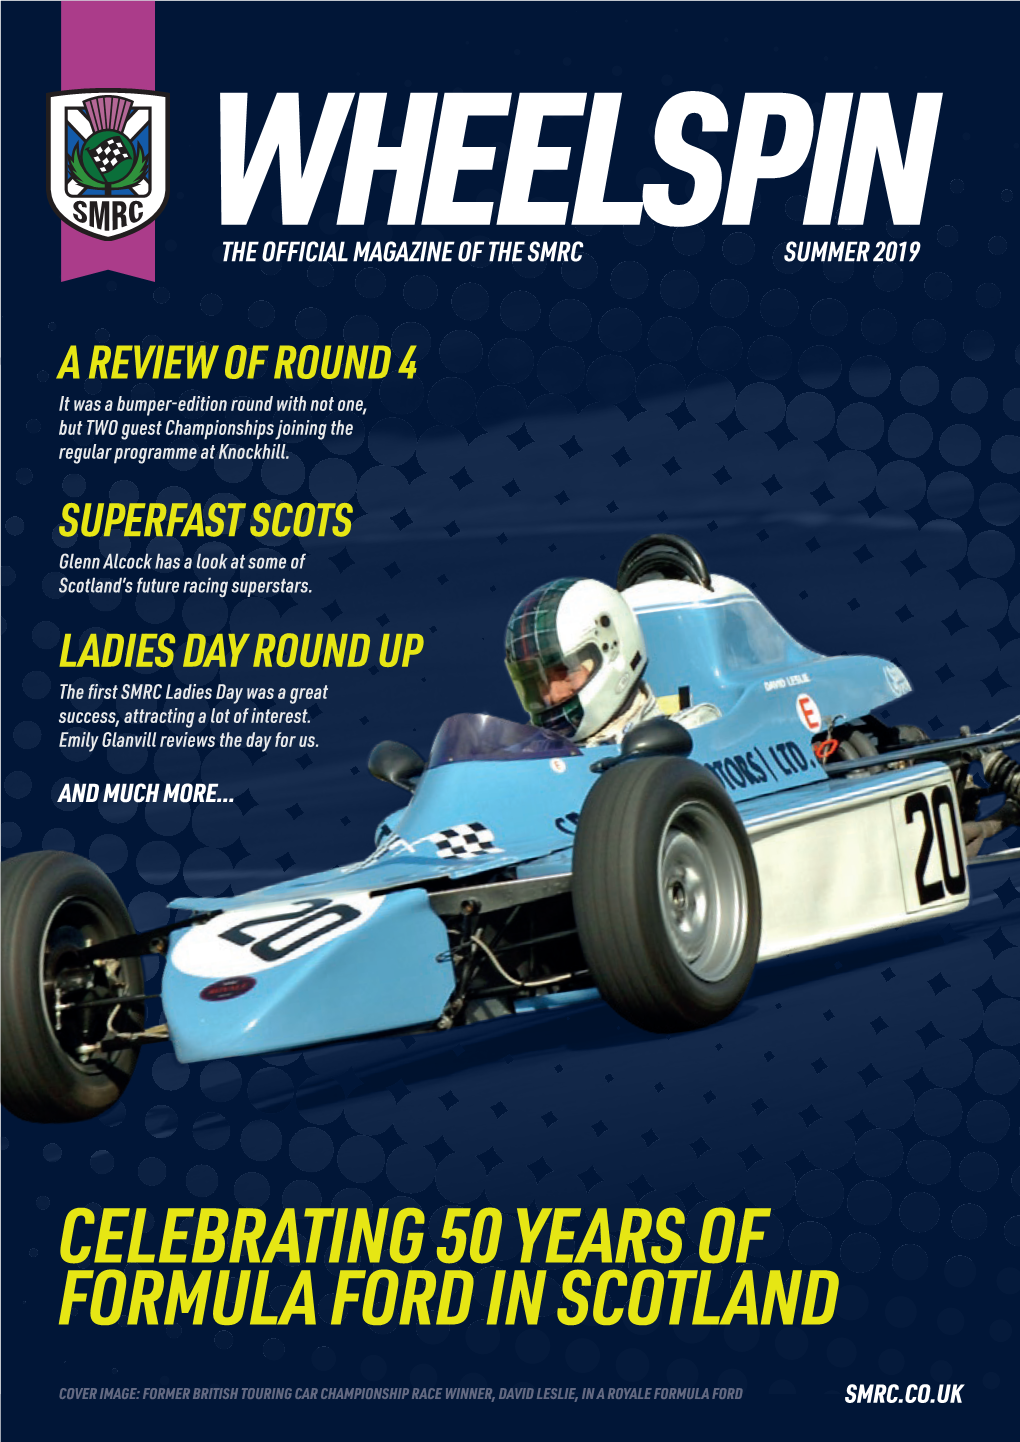 Celebrating 50 Years of Formula Ford in Scotland